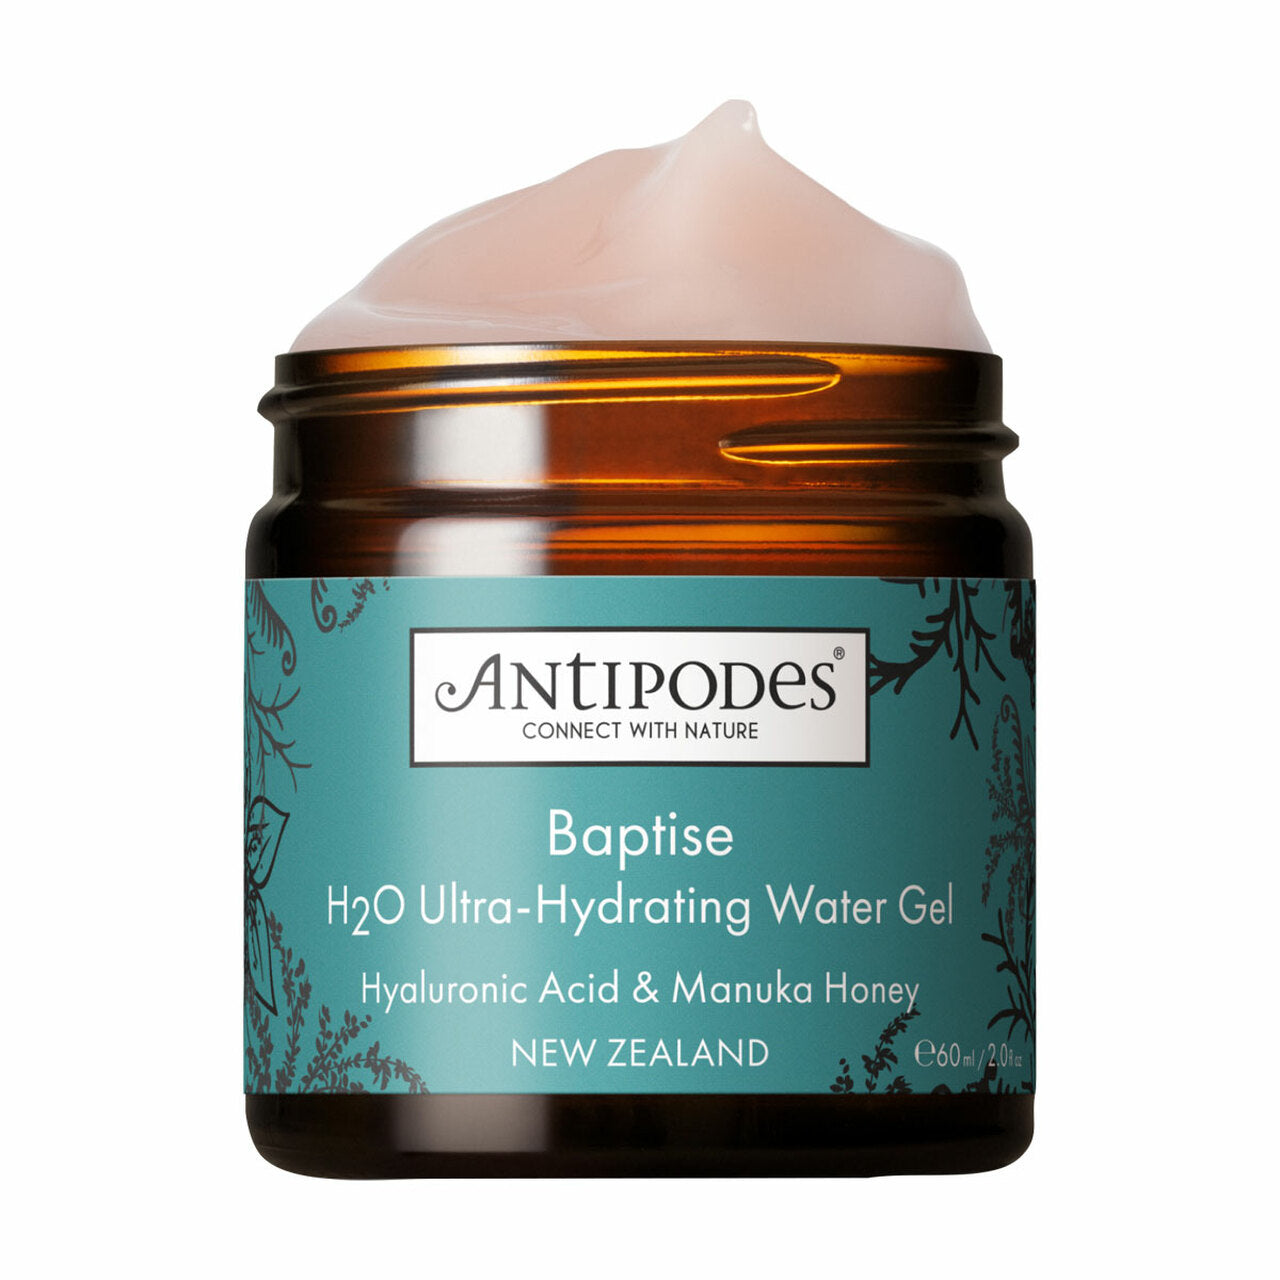 Antipodes Baptise H2O Ultra-Hydrating Water Gel 60ml.